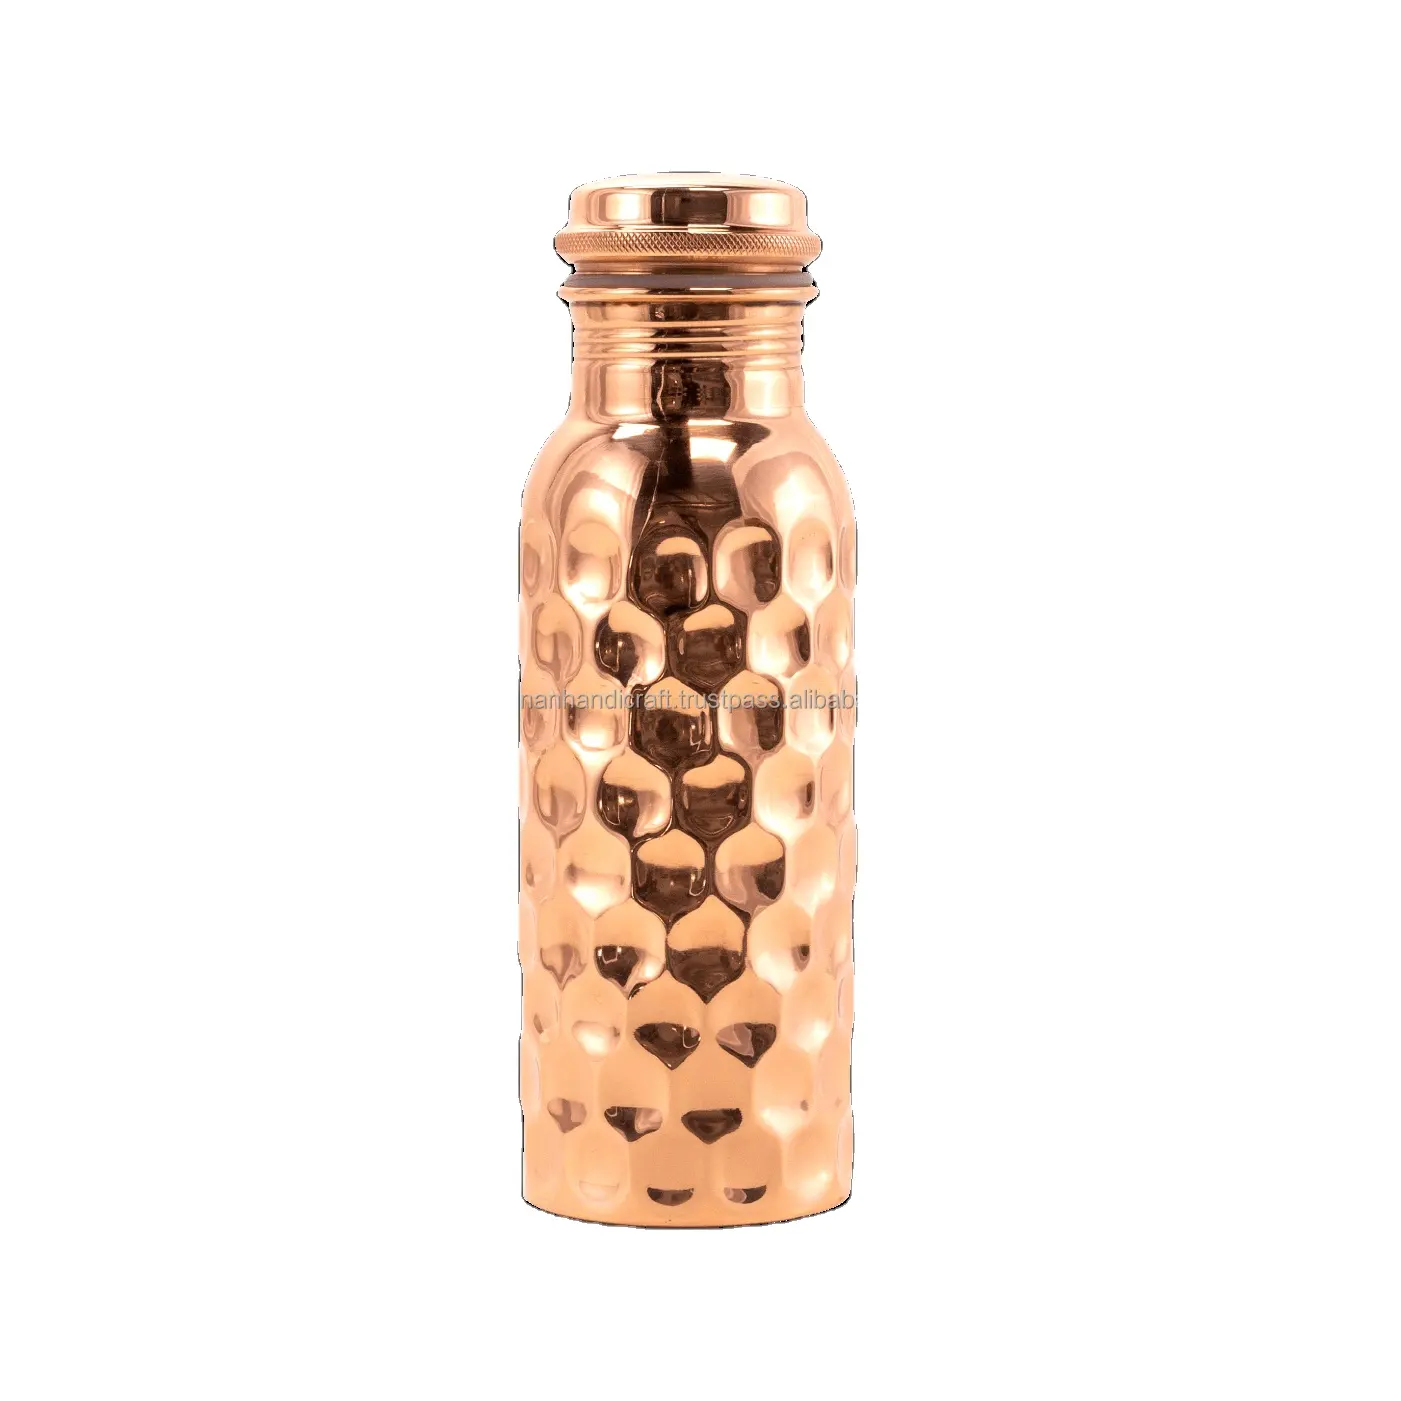 Customized Design & Style Metal Copper Bottle Low price Antique Fancy Handmade Indian Best Selling Copper Hammered Bottle